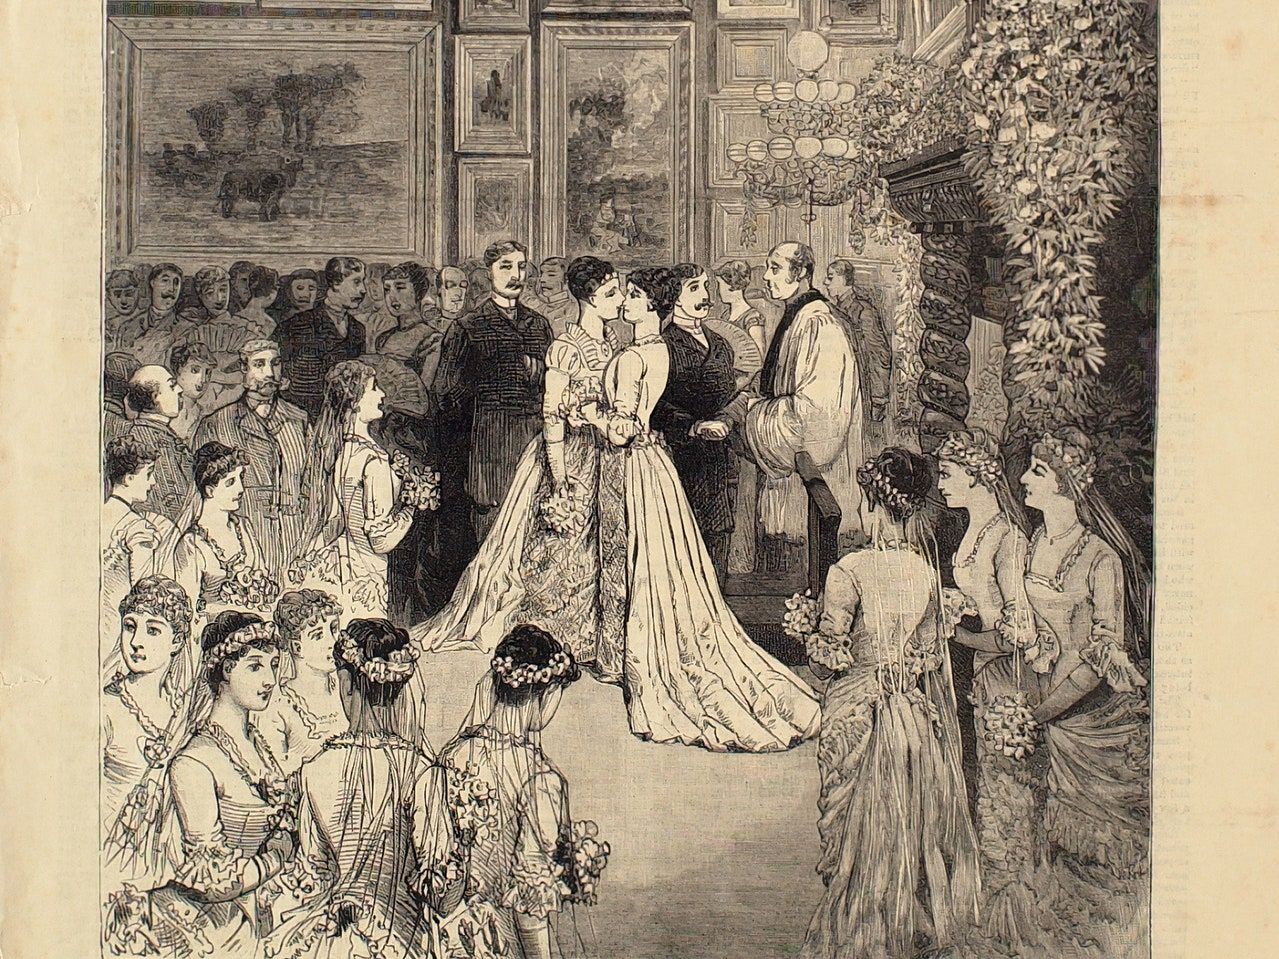 The Glitz and Glamour: Exploring New York Society in the 19th Century